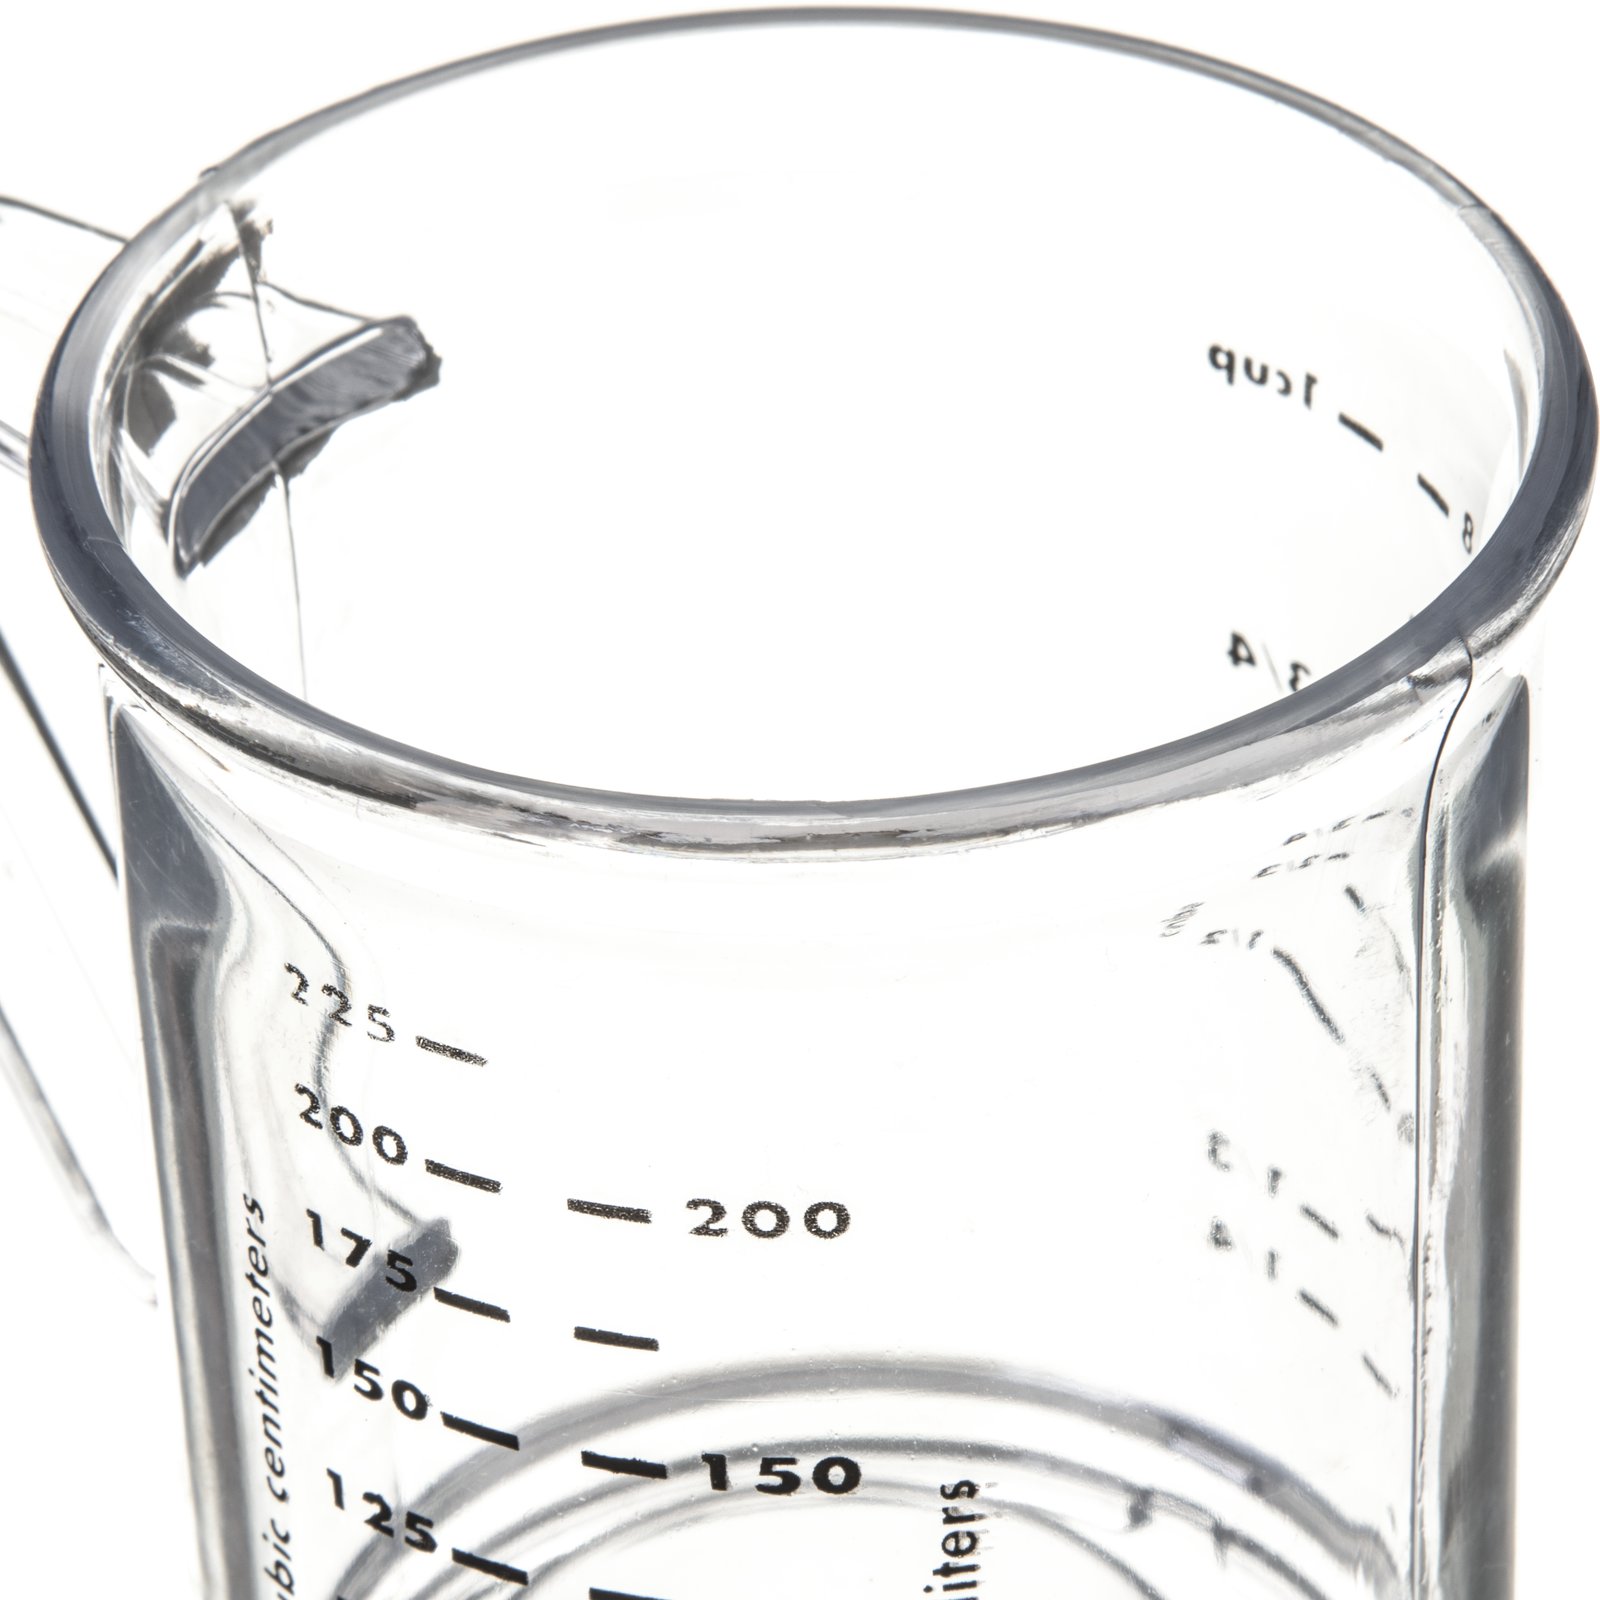 Dry Measuring Cup - 1 Cup - Cutler's